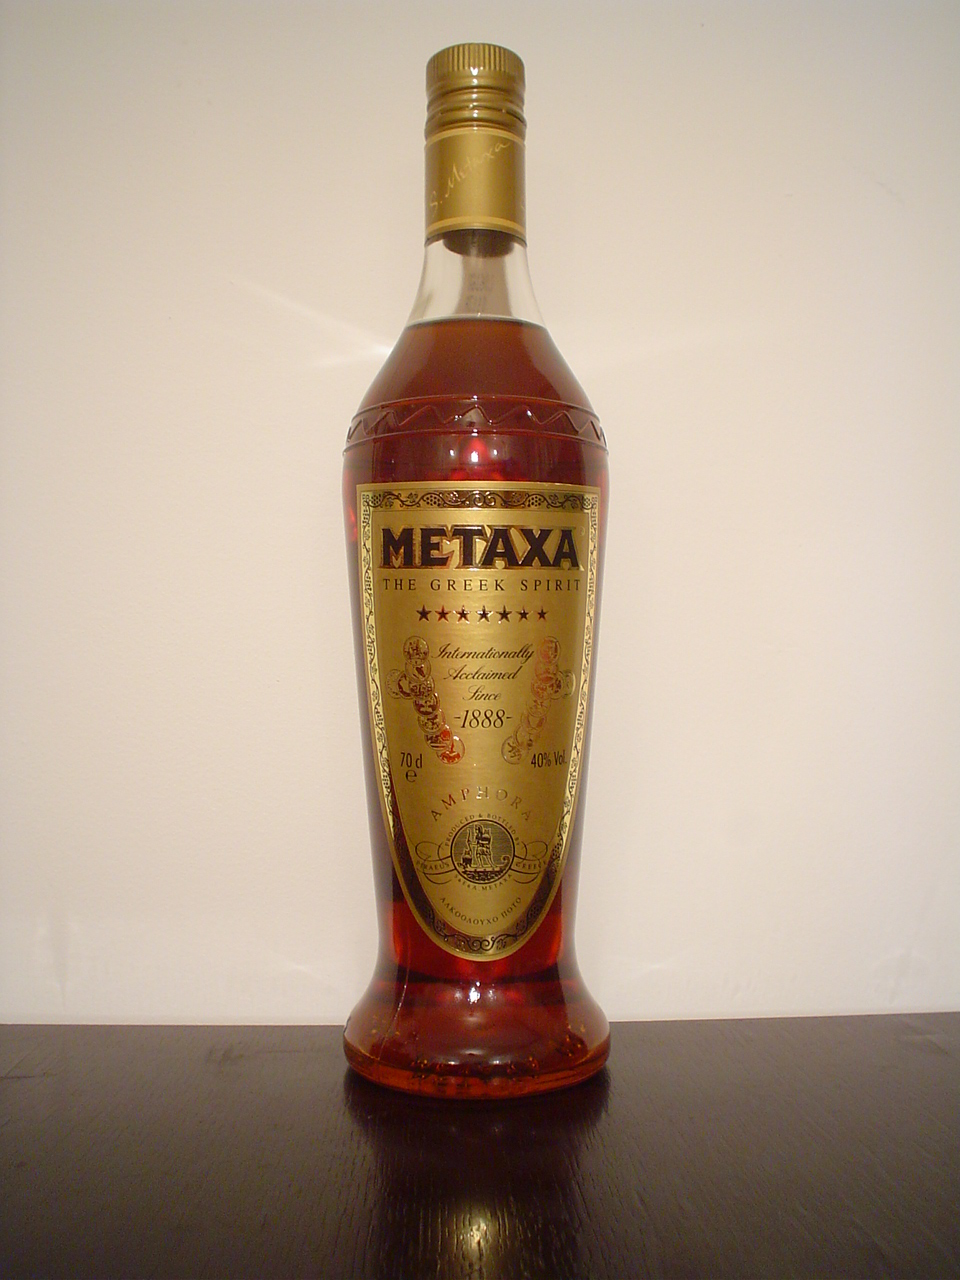 Metaxa in the United States